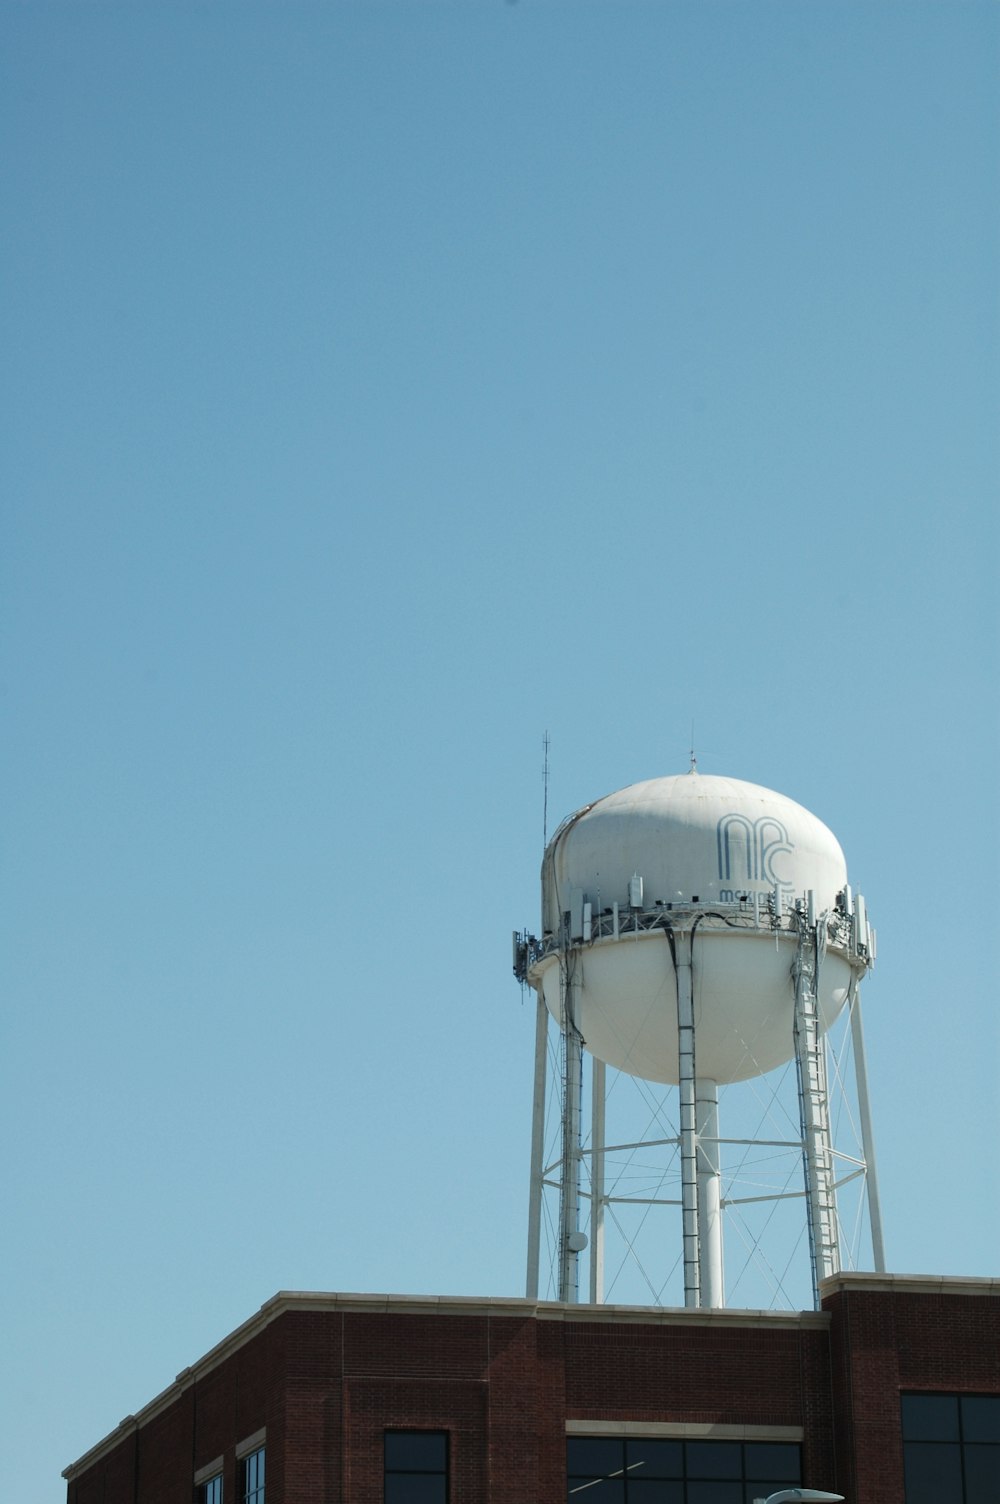 white and gray water tank under blue sky during daytime